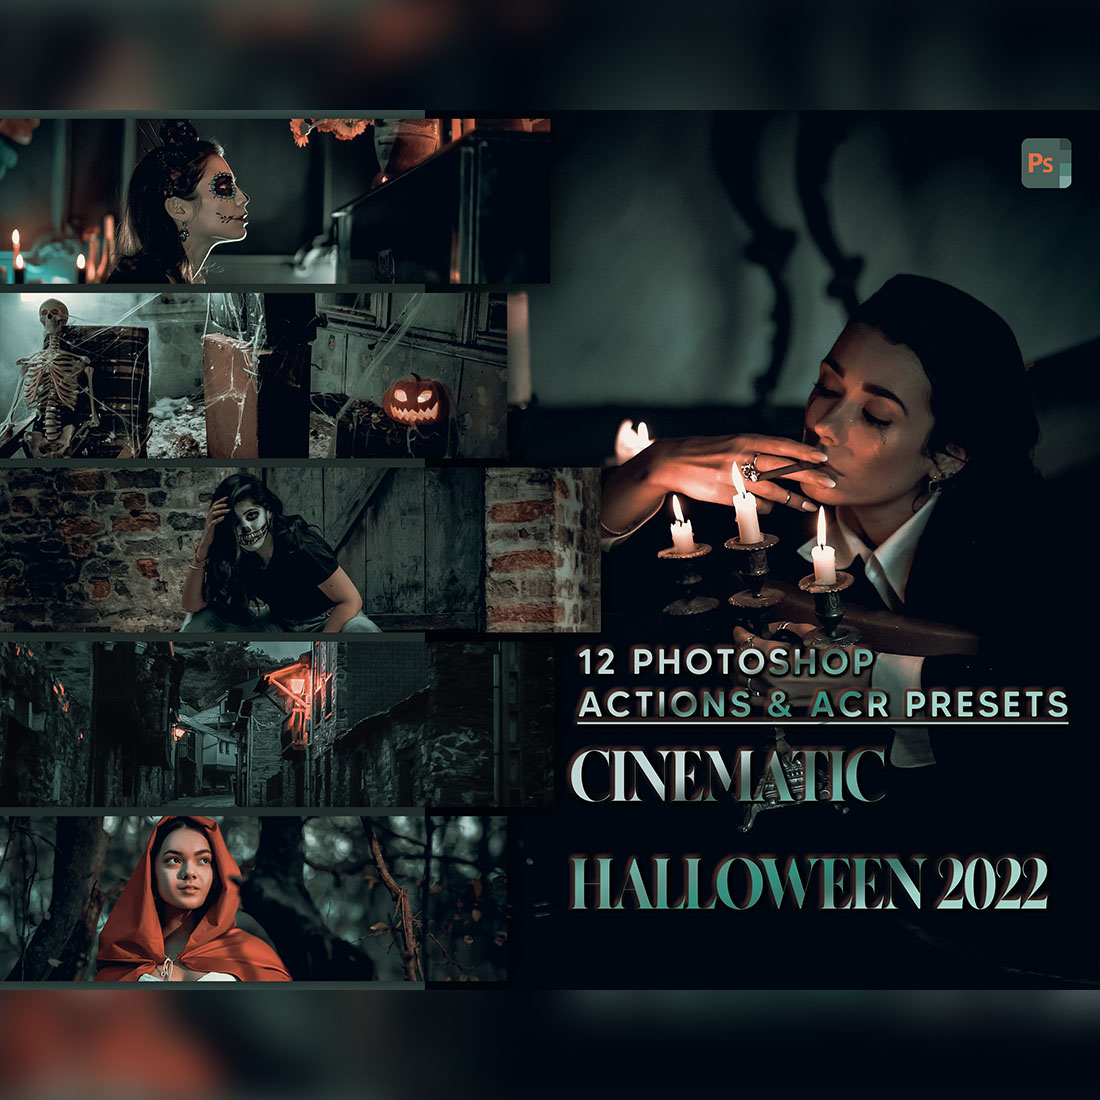 12 Photoshop Actions, Cinematic Halloween 2022 Ps Action, Film ACR Preset, Cinema Ps Filter, Atn Portrait And Lifestyle Theme For Instagram, Blogger cover image.